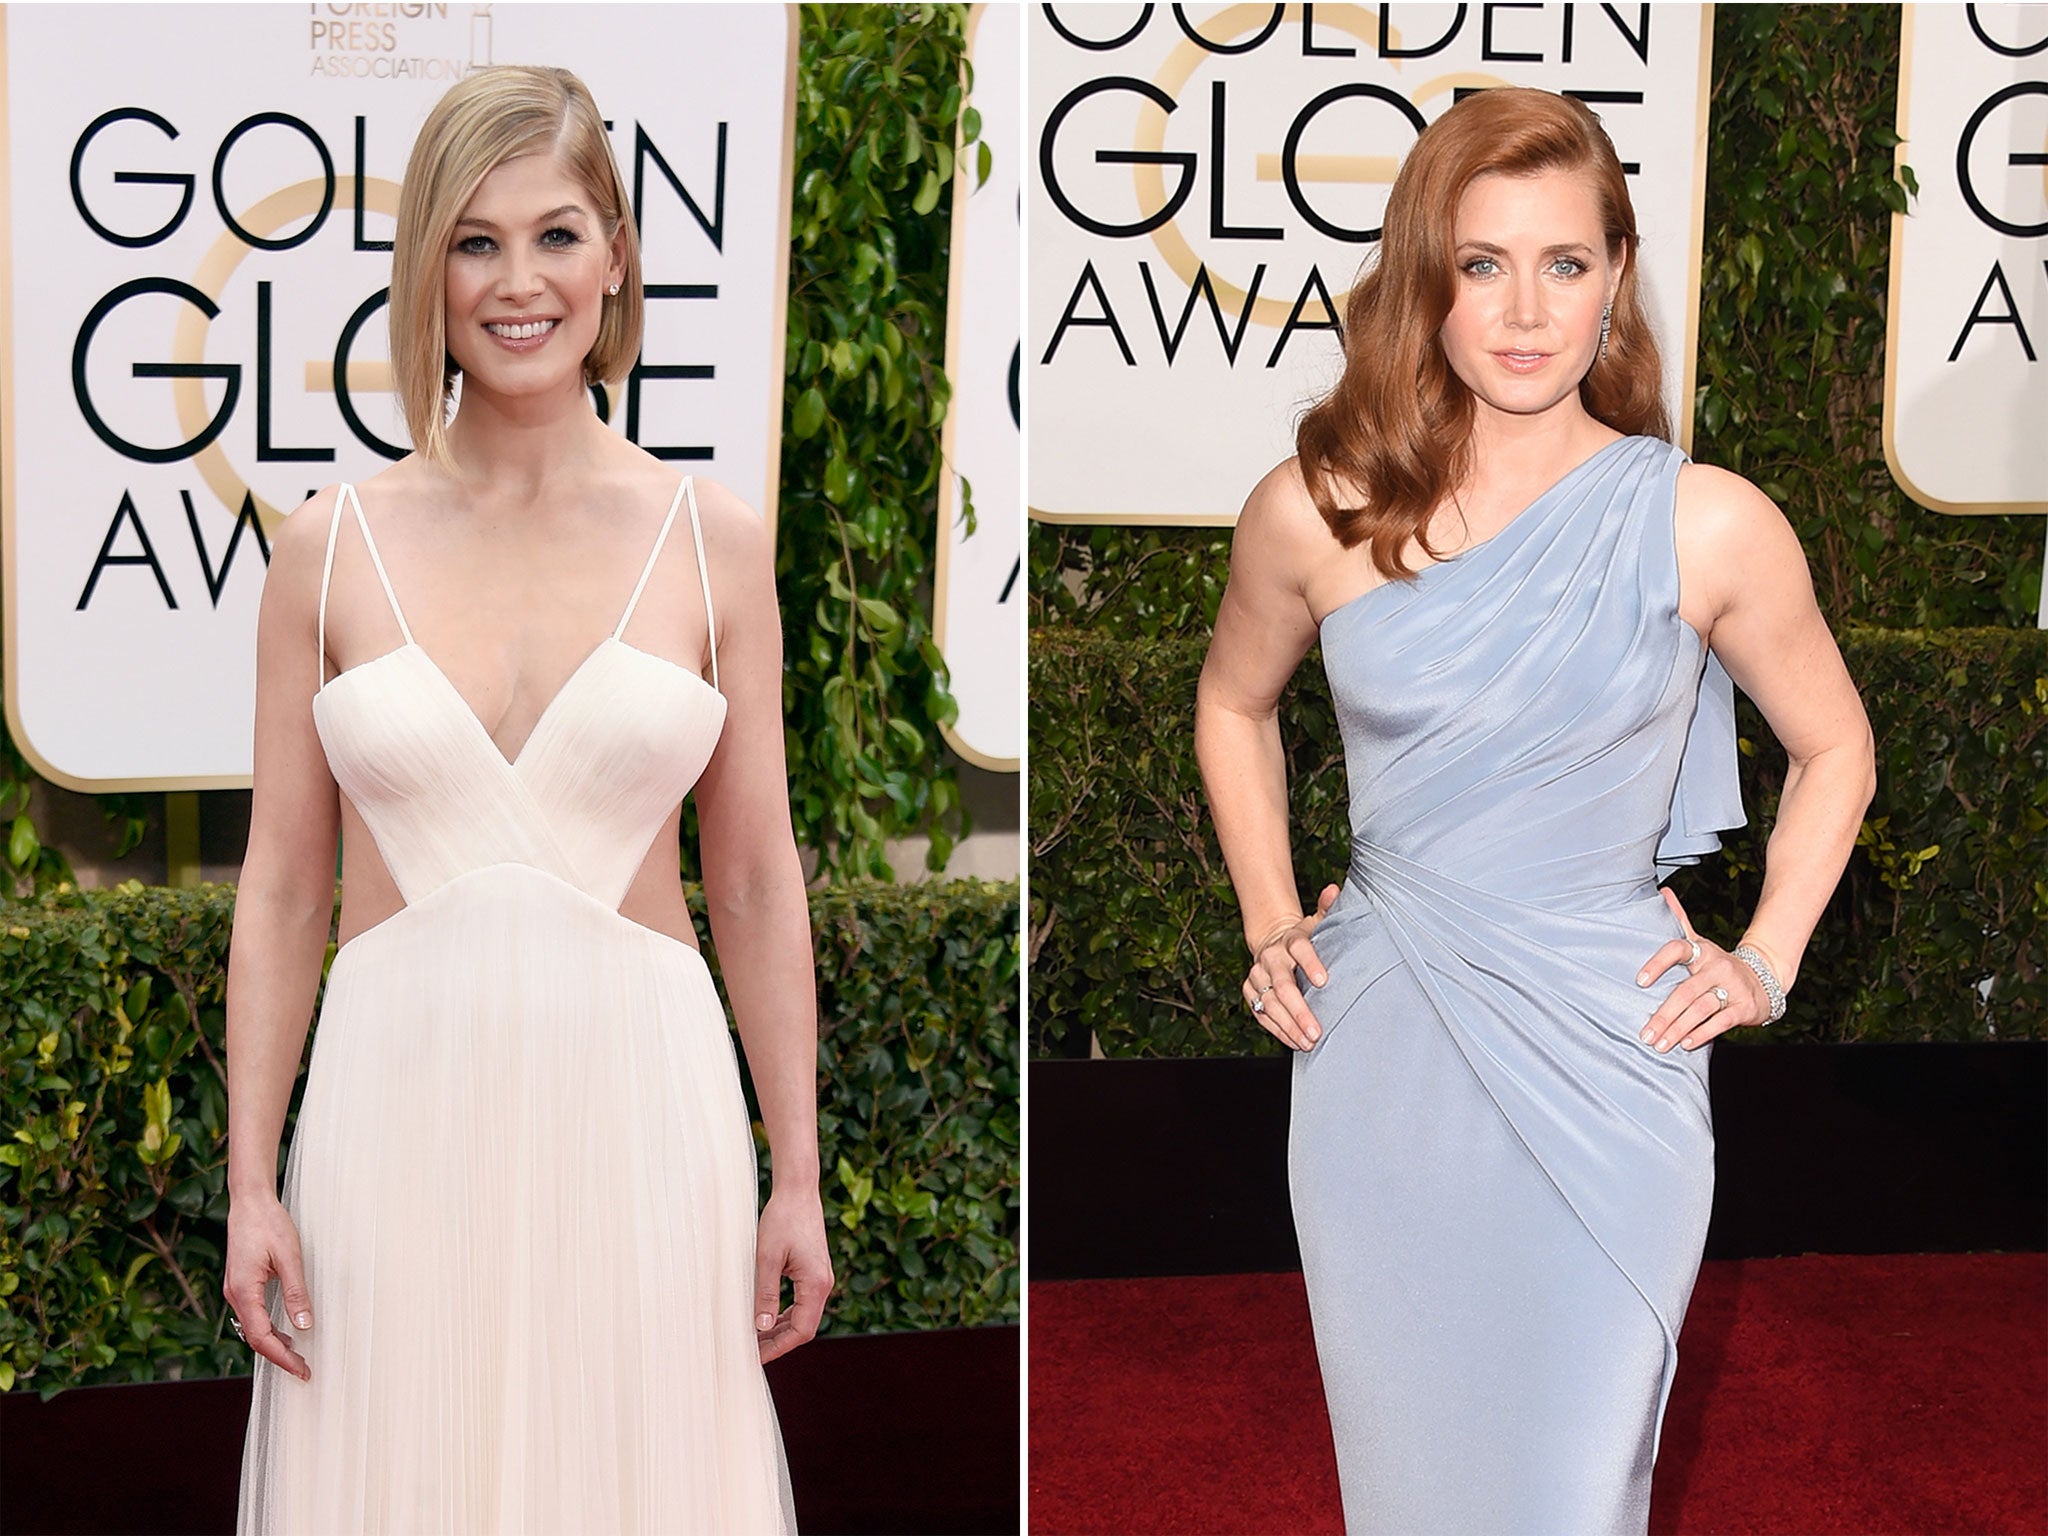 Rosamund Pike and Amy Adams arrive at the Golden Globes 2015